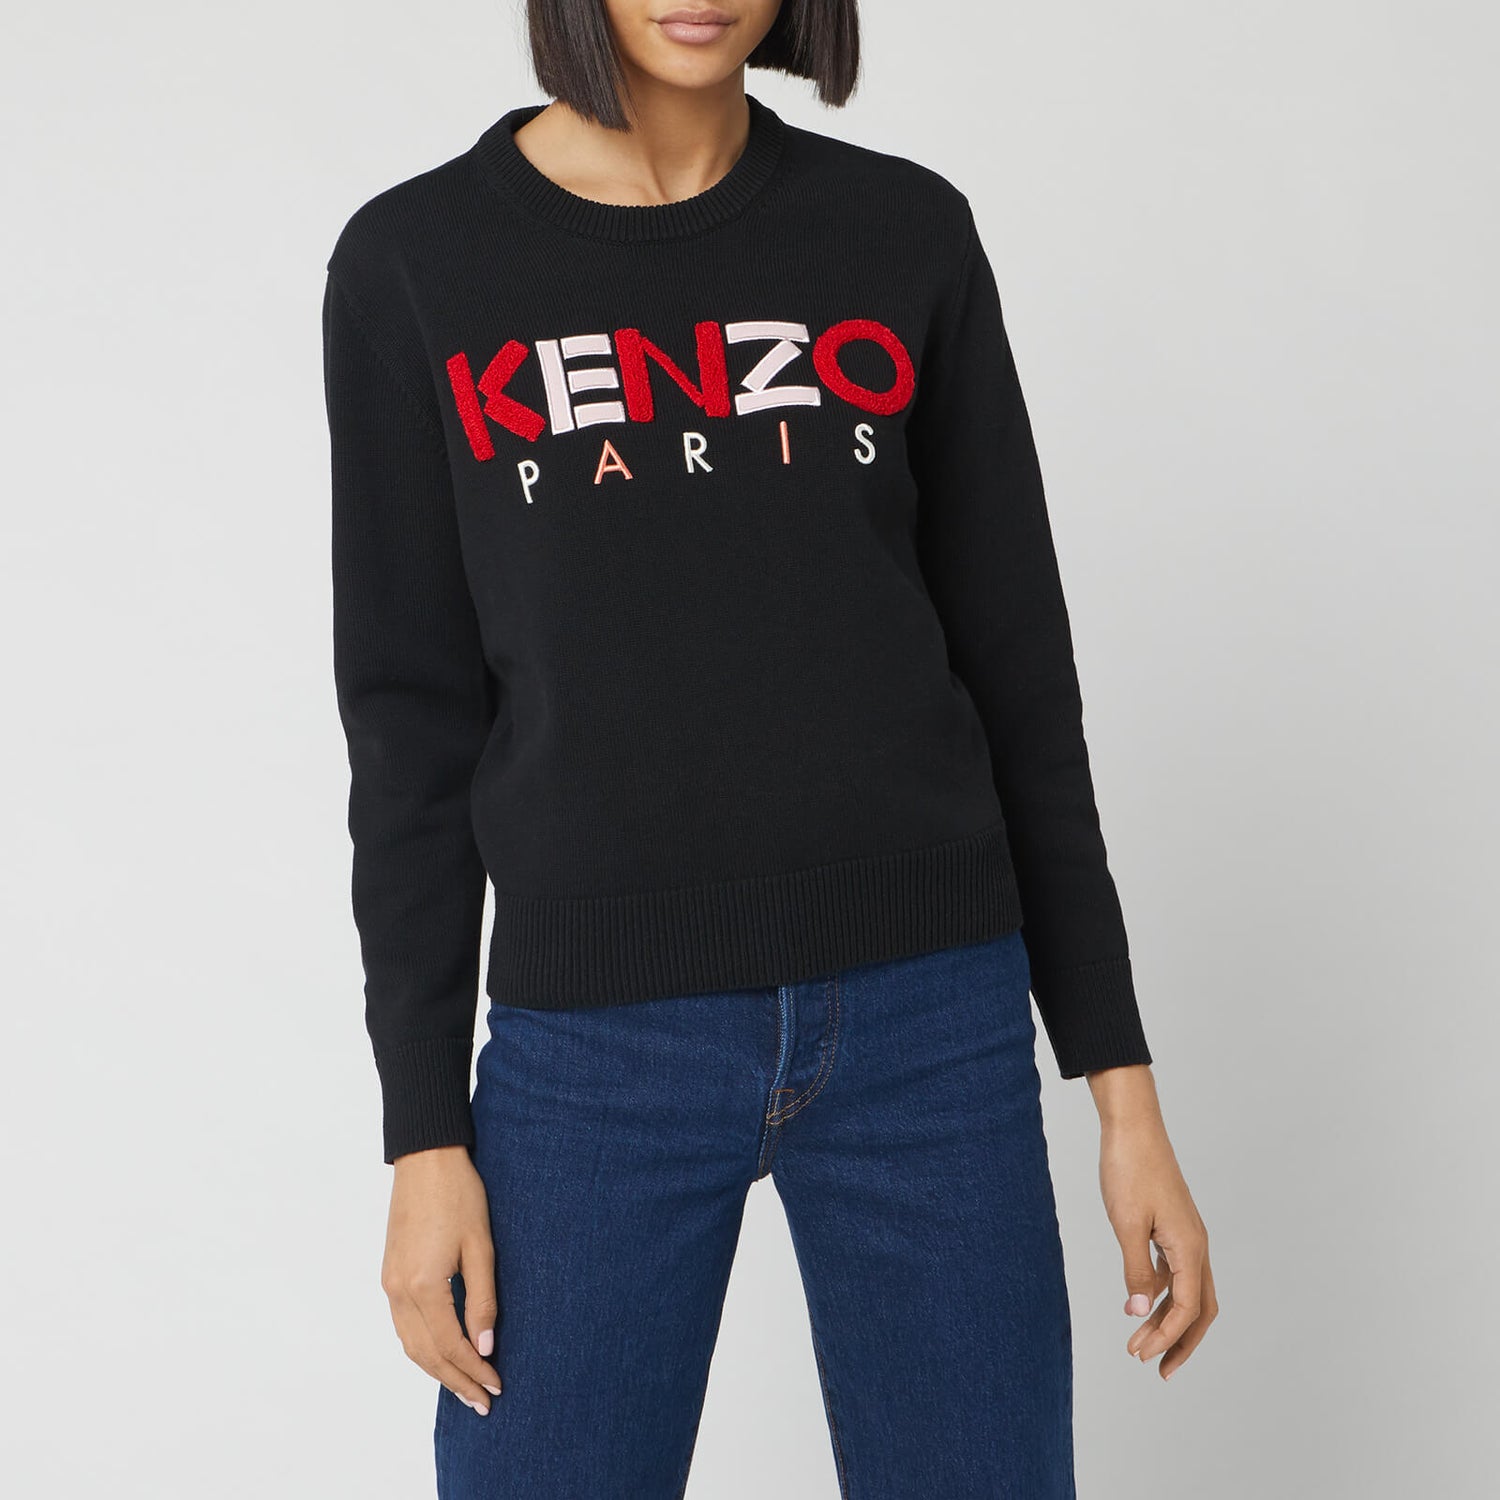 KENZO Women's Kenzo Paris Jumper - Black - Free UK Delivery Available